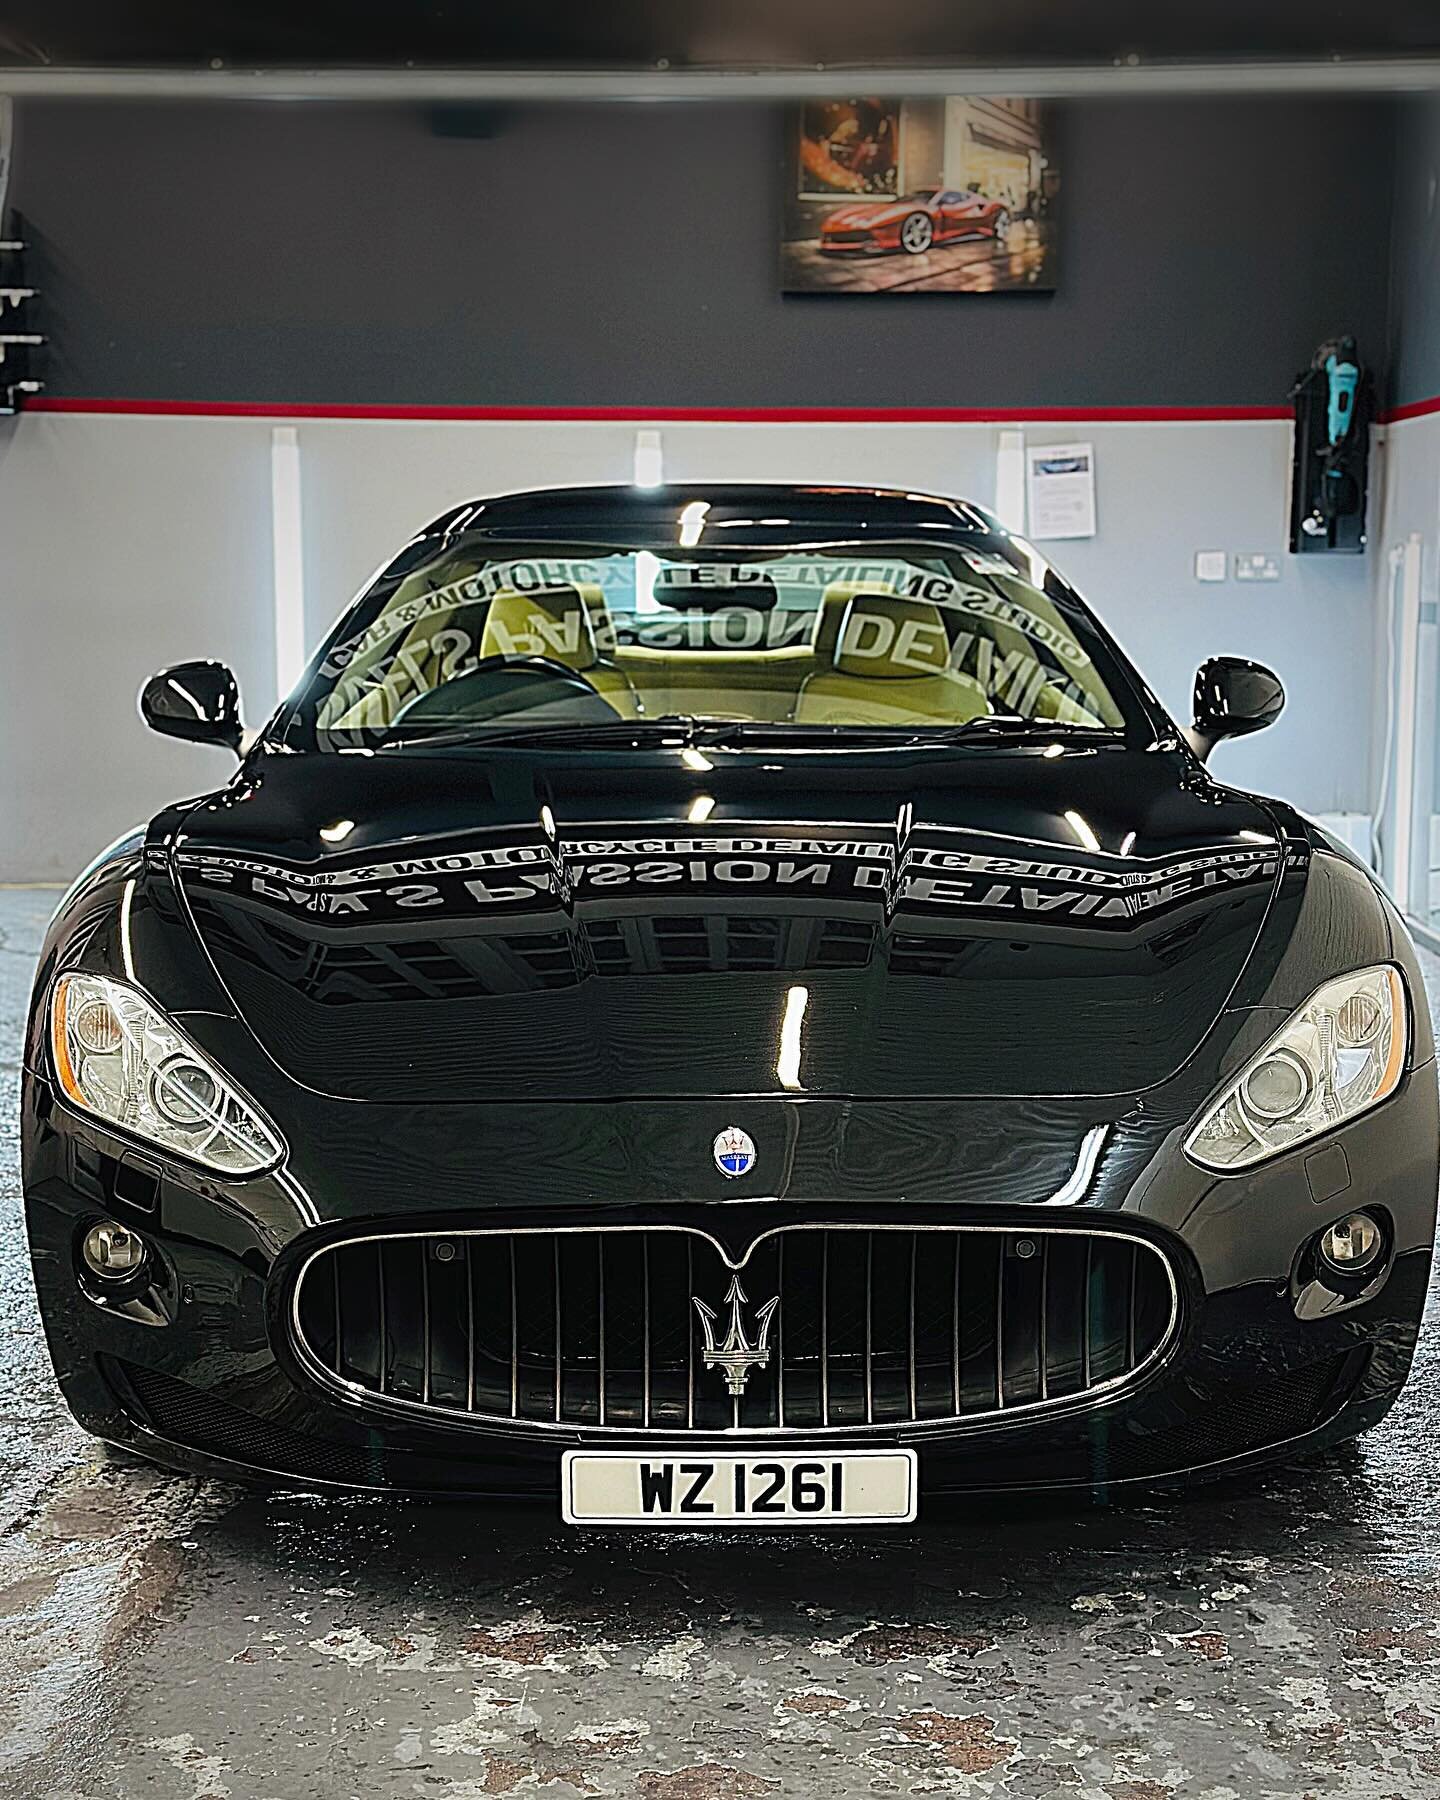 This 2009 Maserati Grantourismo is a pride and joy of one of our high profile customer who wanted to restore the paintwork to its former glory and protect it with our best selling Gtechniq ceramic coating. 

If you want to make the paintwork of your 